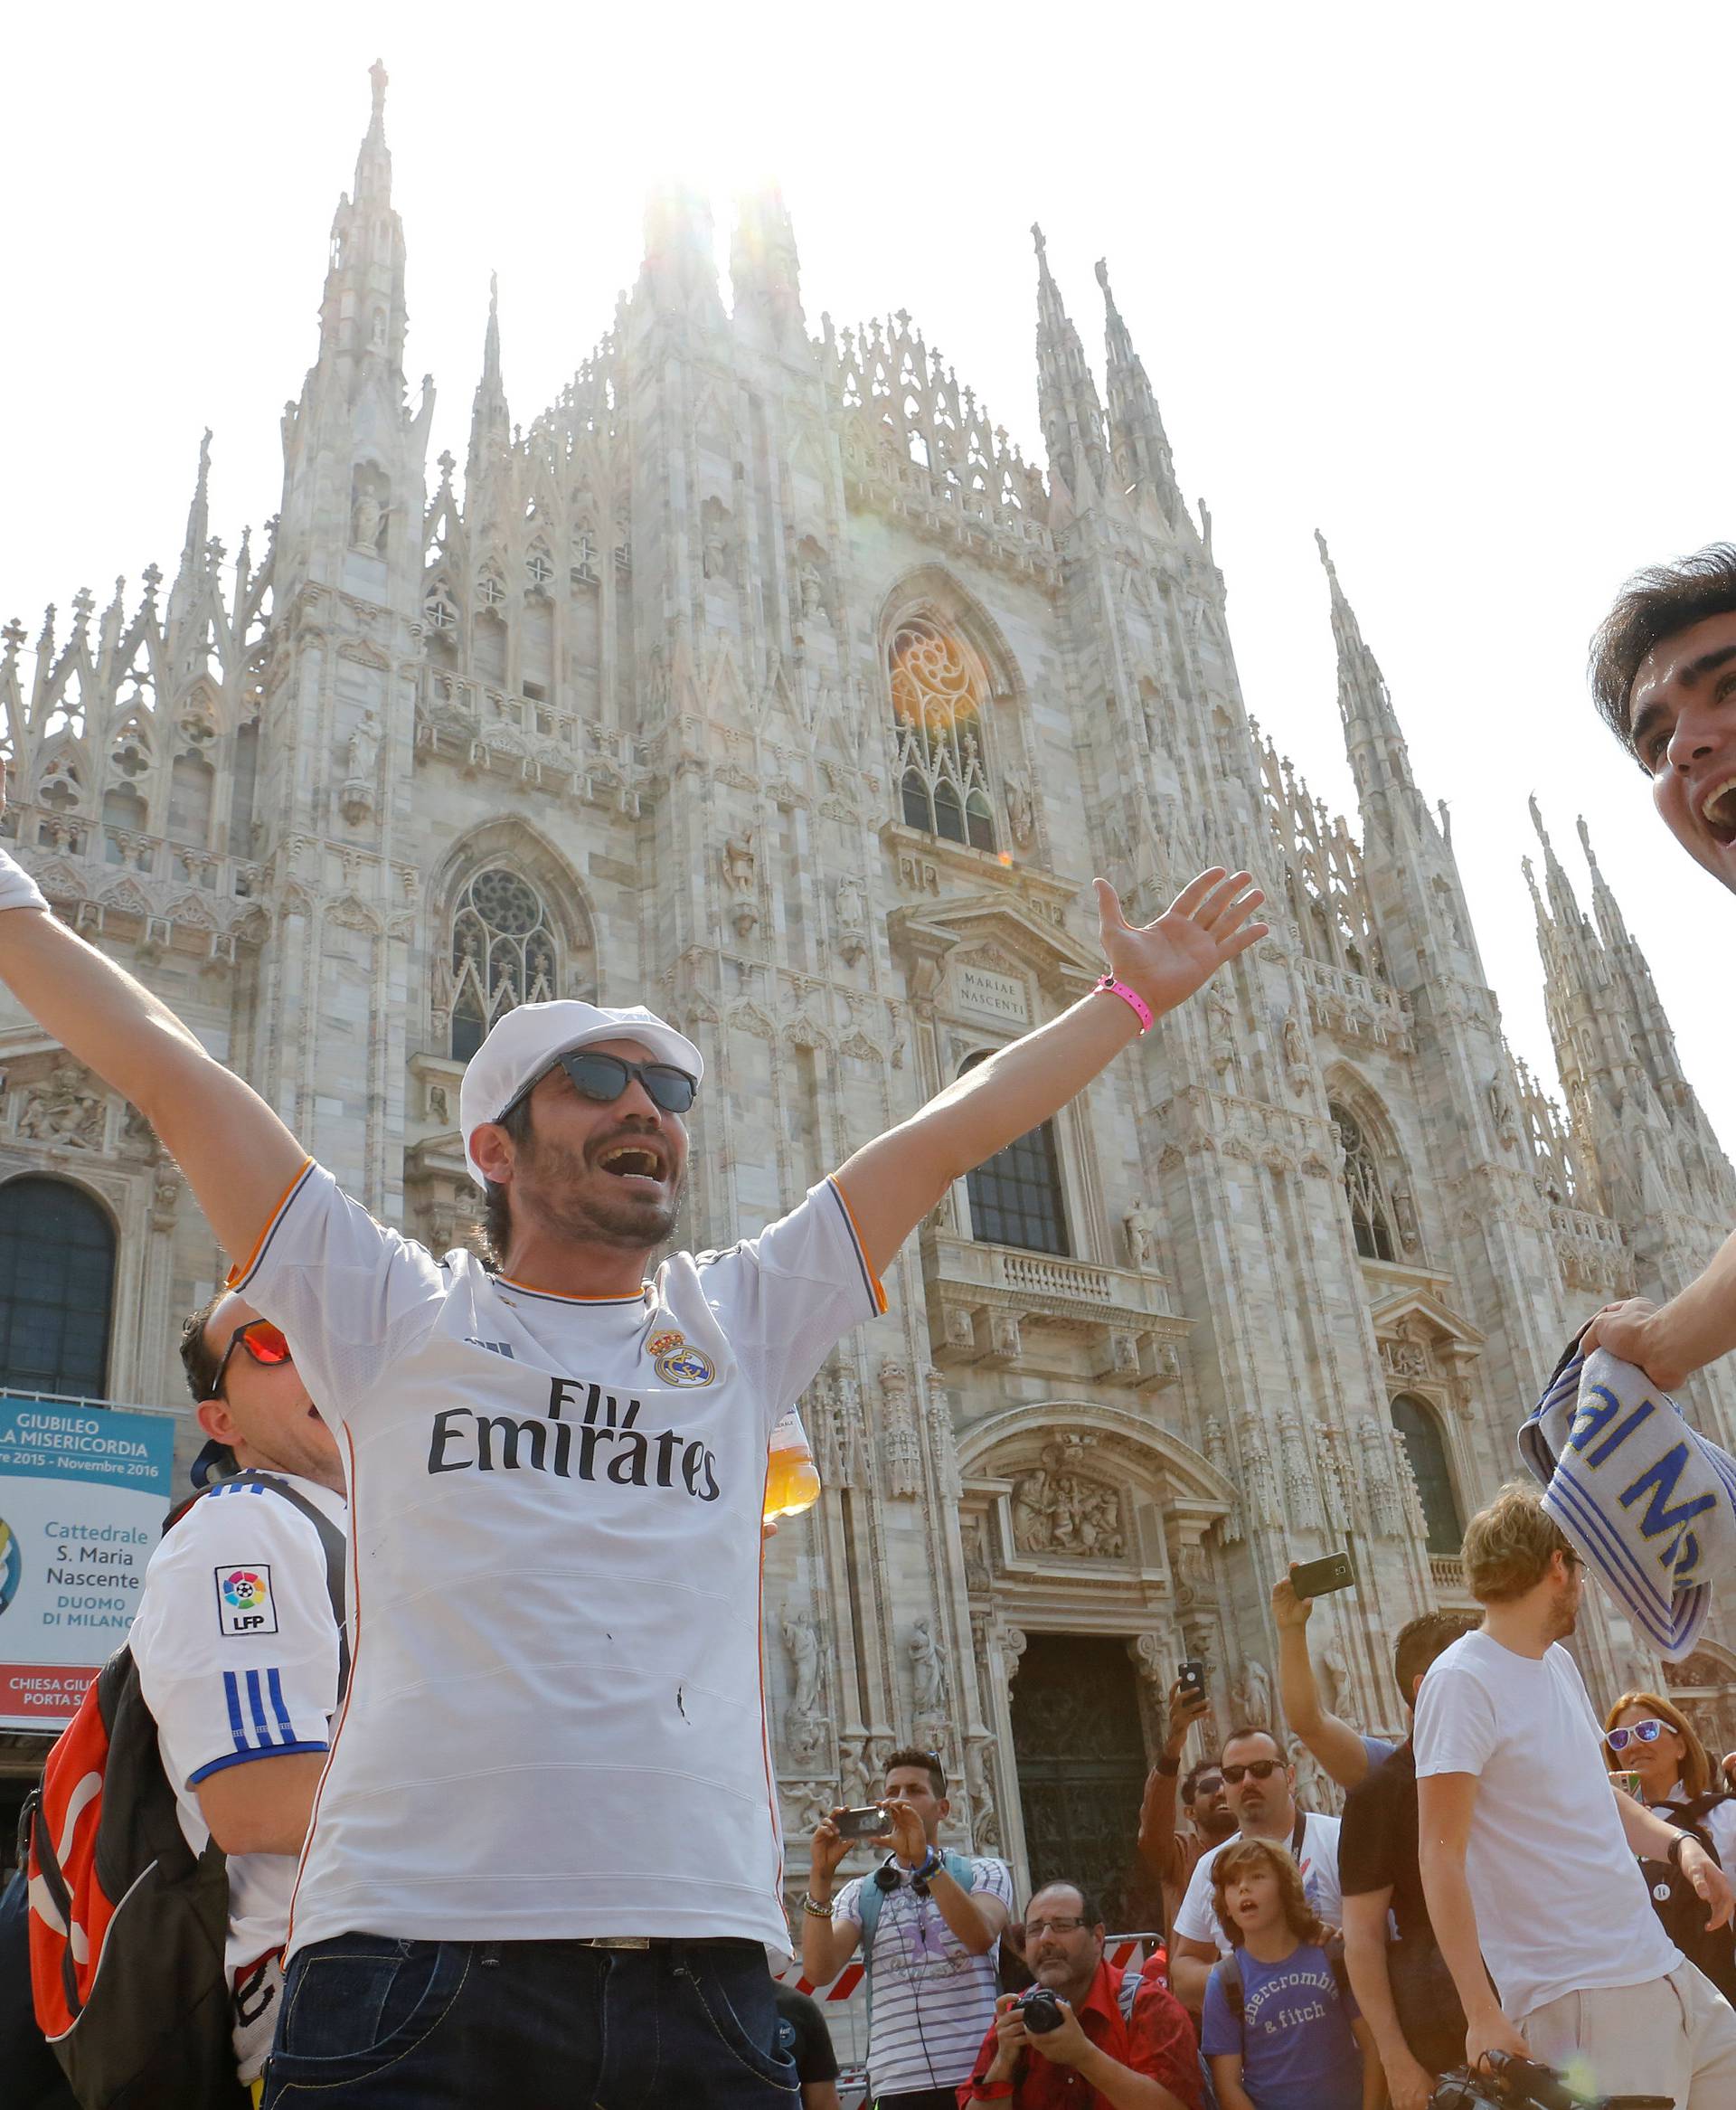 Real Madrid's fans shout slogans as they stay in Duomo Square before the Champions League Final between Real Madrid and Atletico Madrid in Milan